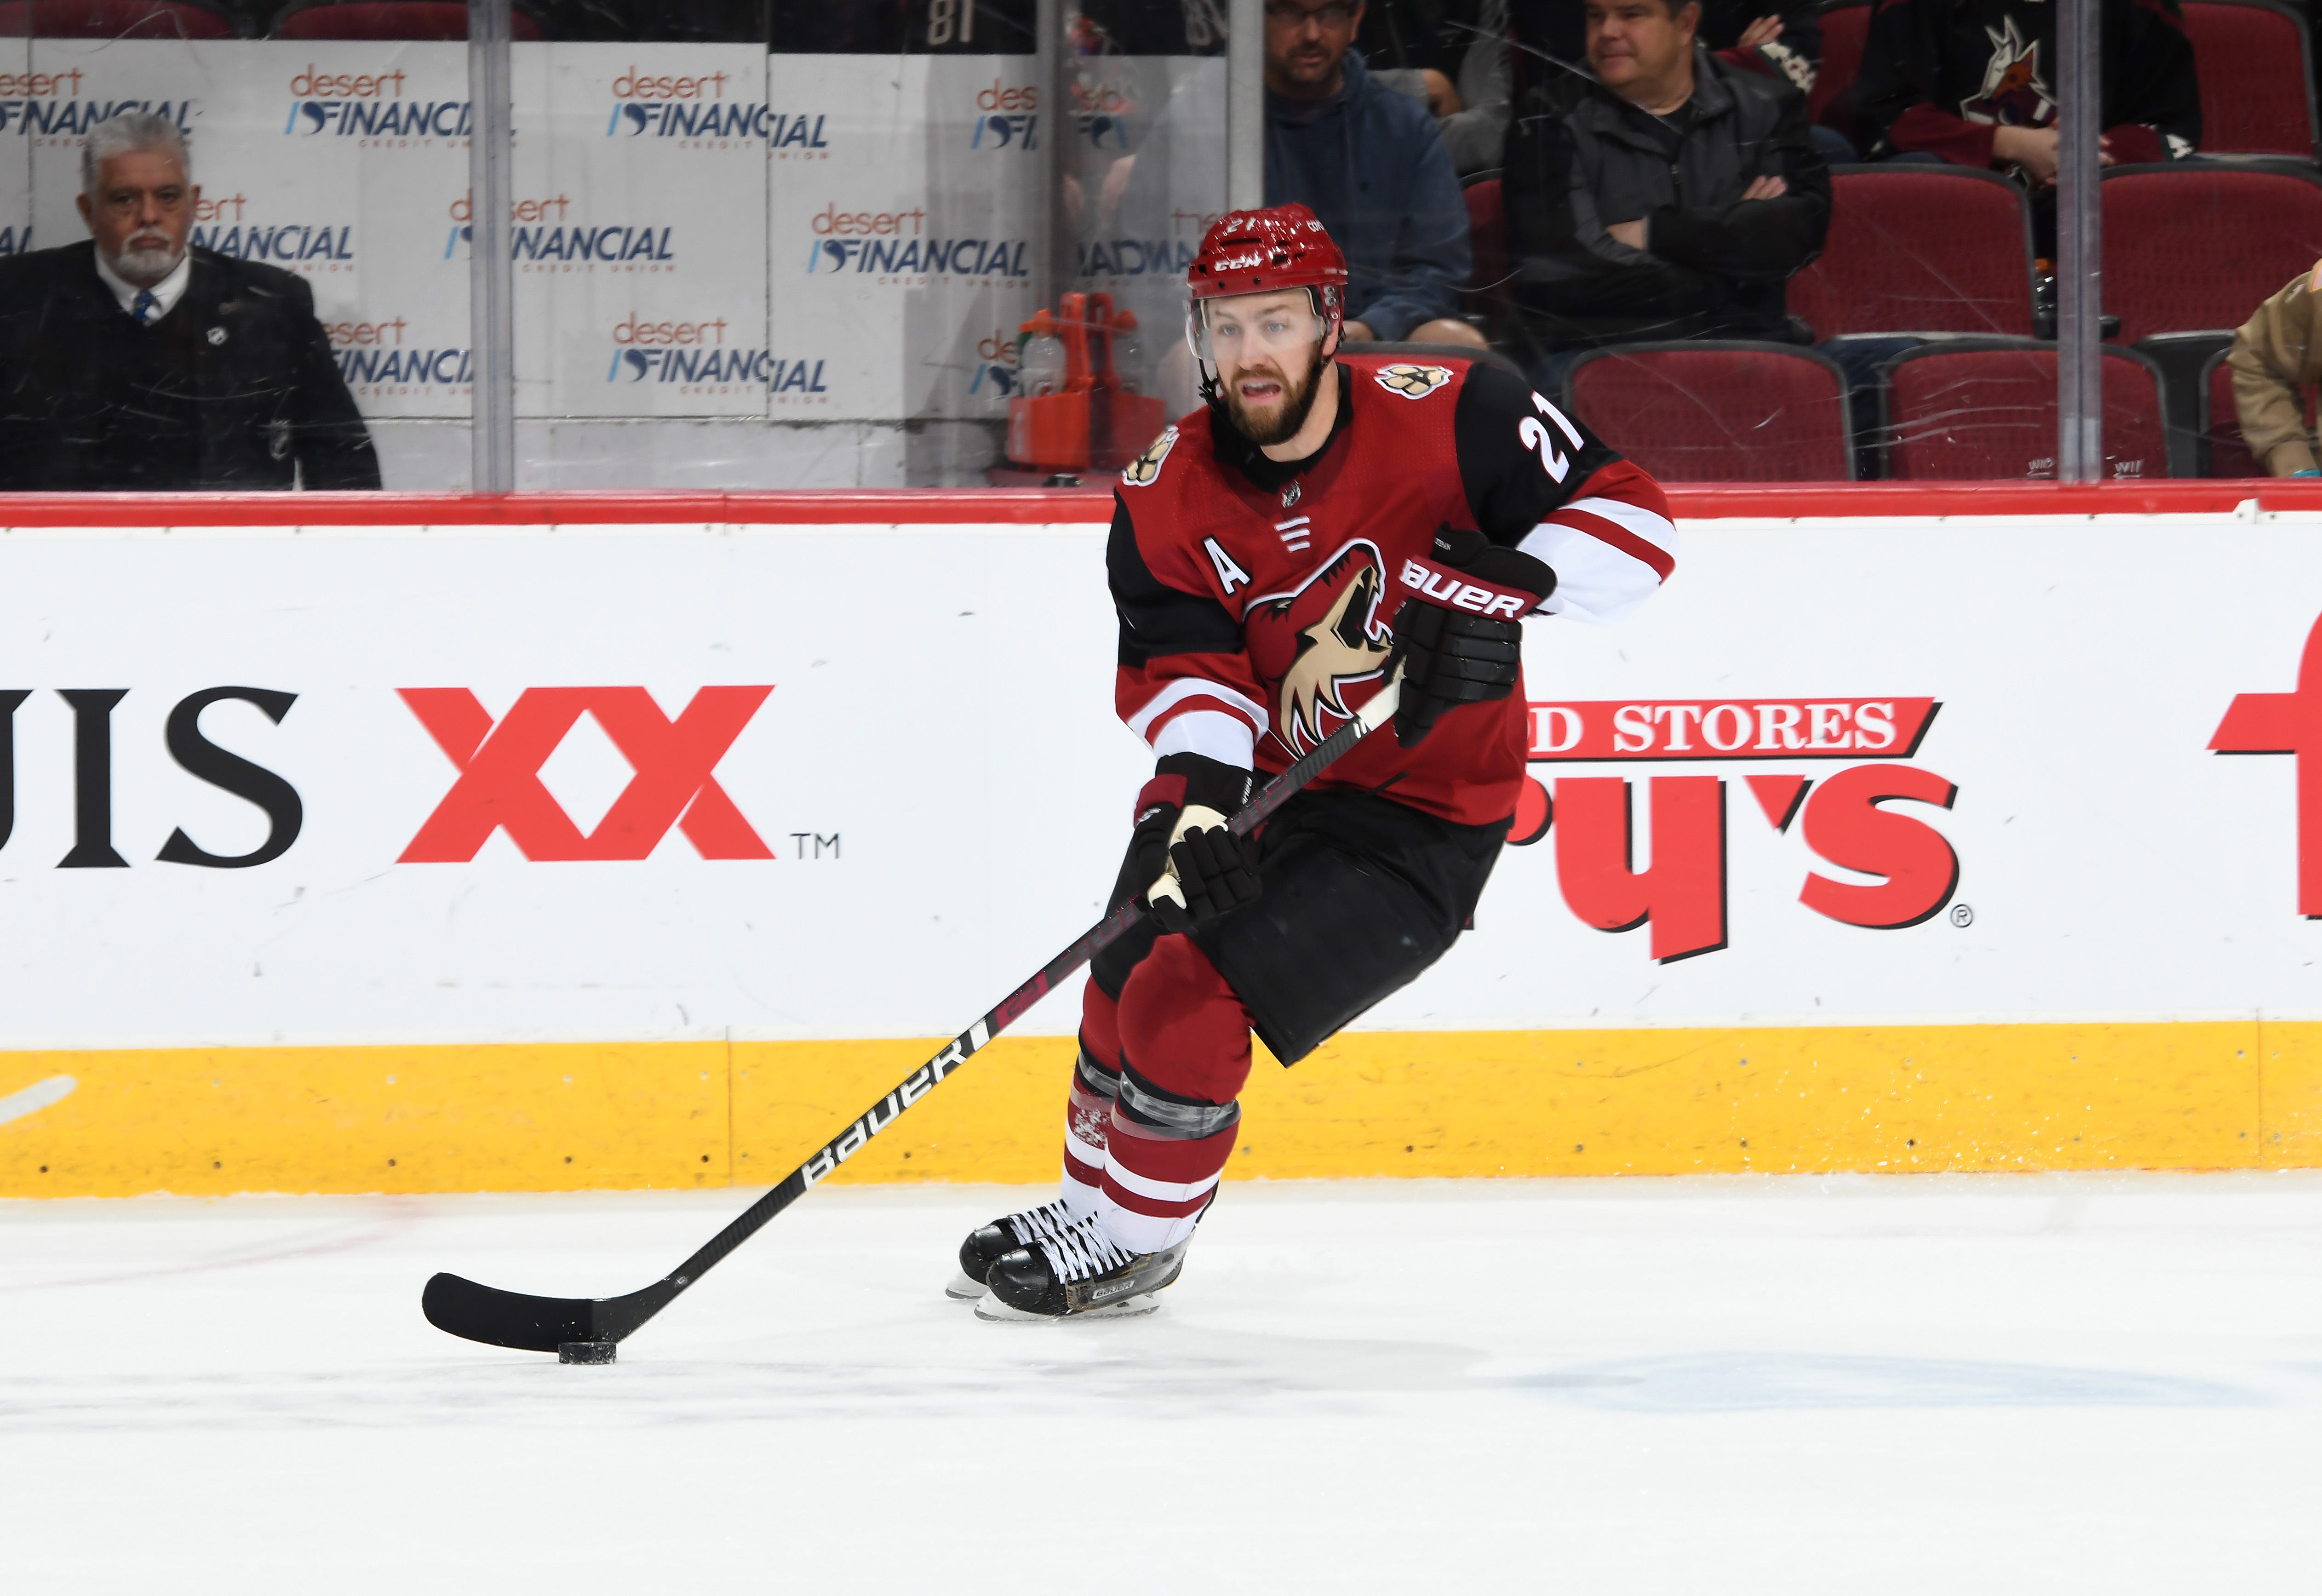 Taylor Hall trade rumors, speculation still include Arizona Coyotes